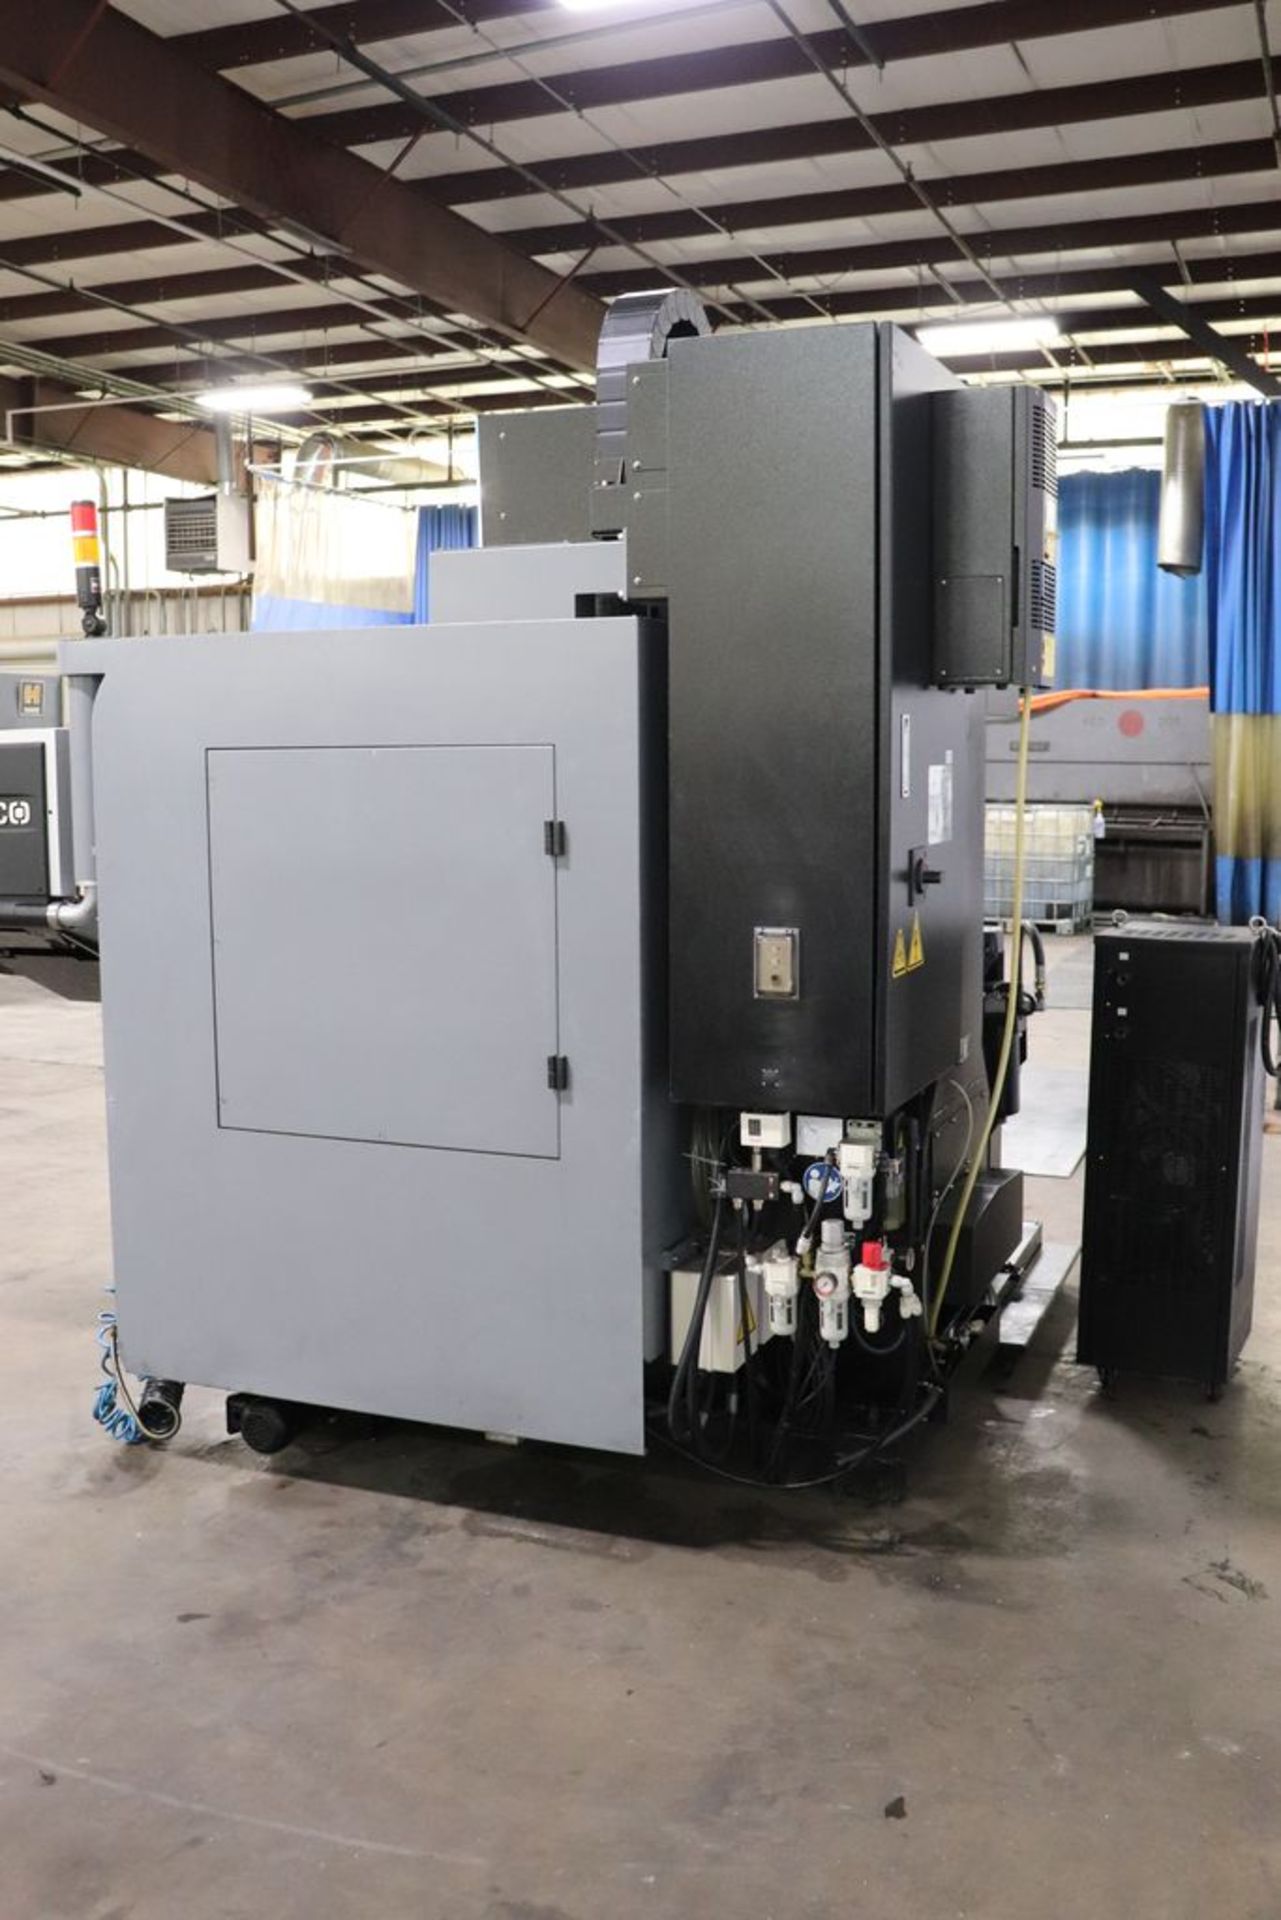 2020 Hurco VM10Ui 5-Axis Integrated Trunnion CNC Vertical Machining Center - Image 18 of 23